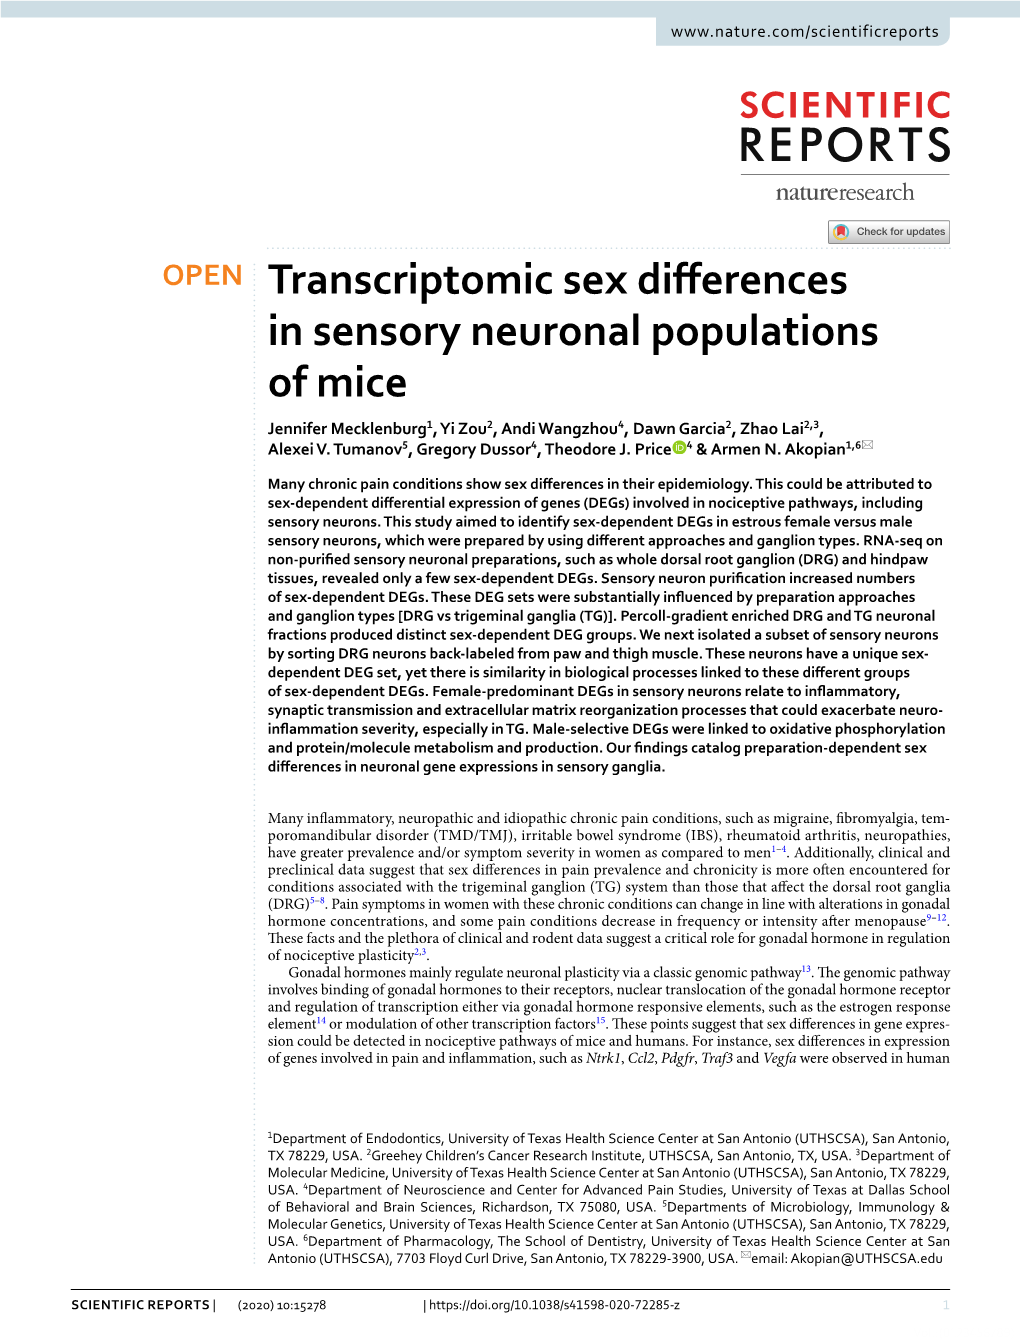 Transcriptomic Sex Differences in Sensory Neuronal Populations of Mice